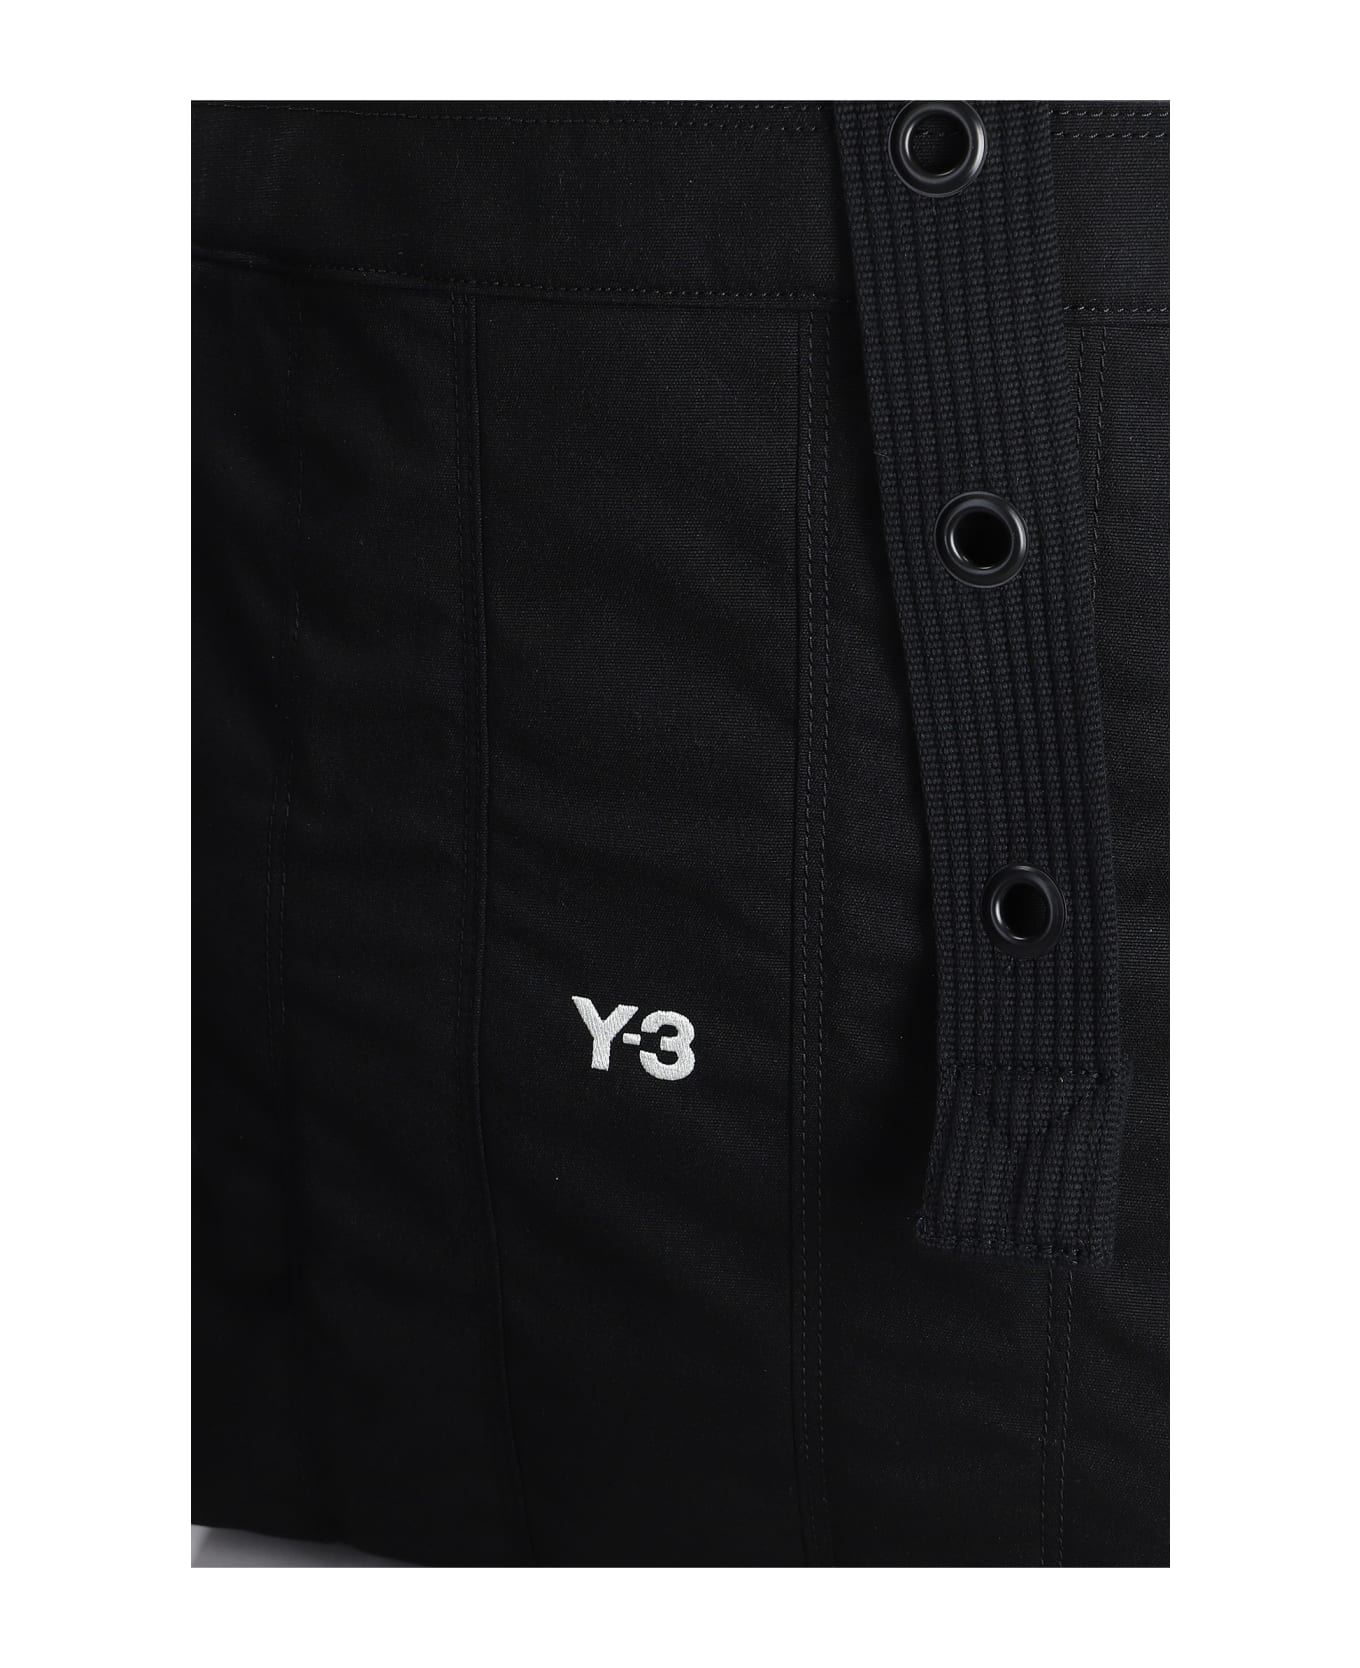 Y-3 Tote In Black Polyester - Black トートバッグ